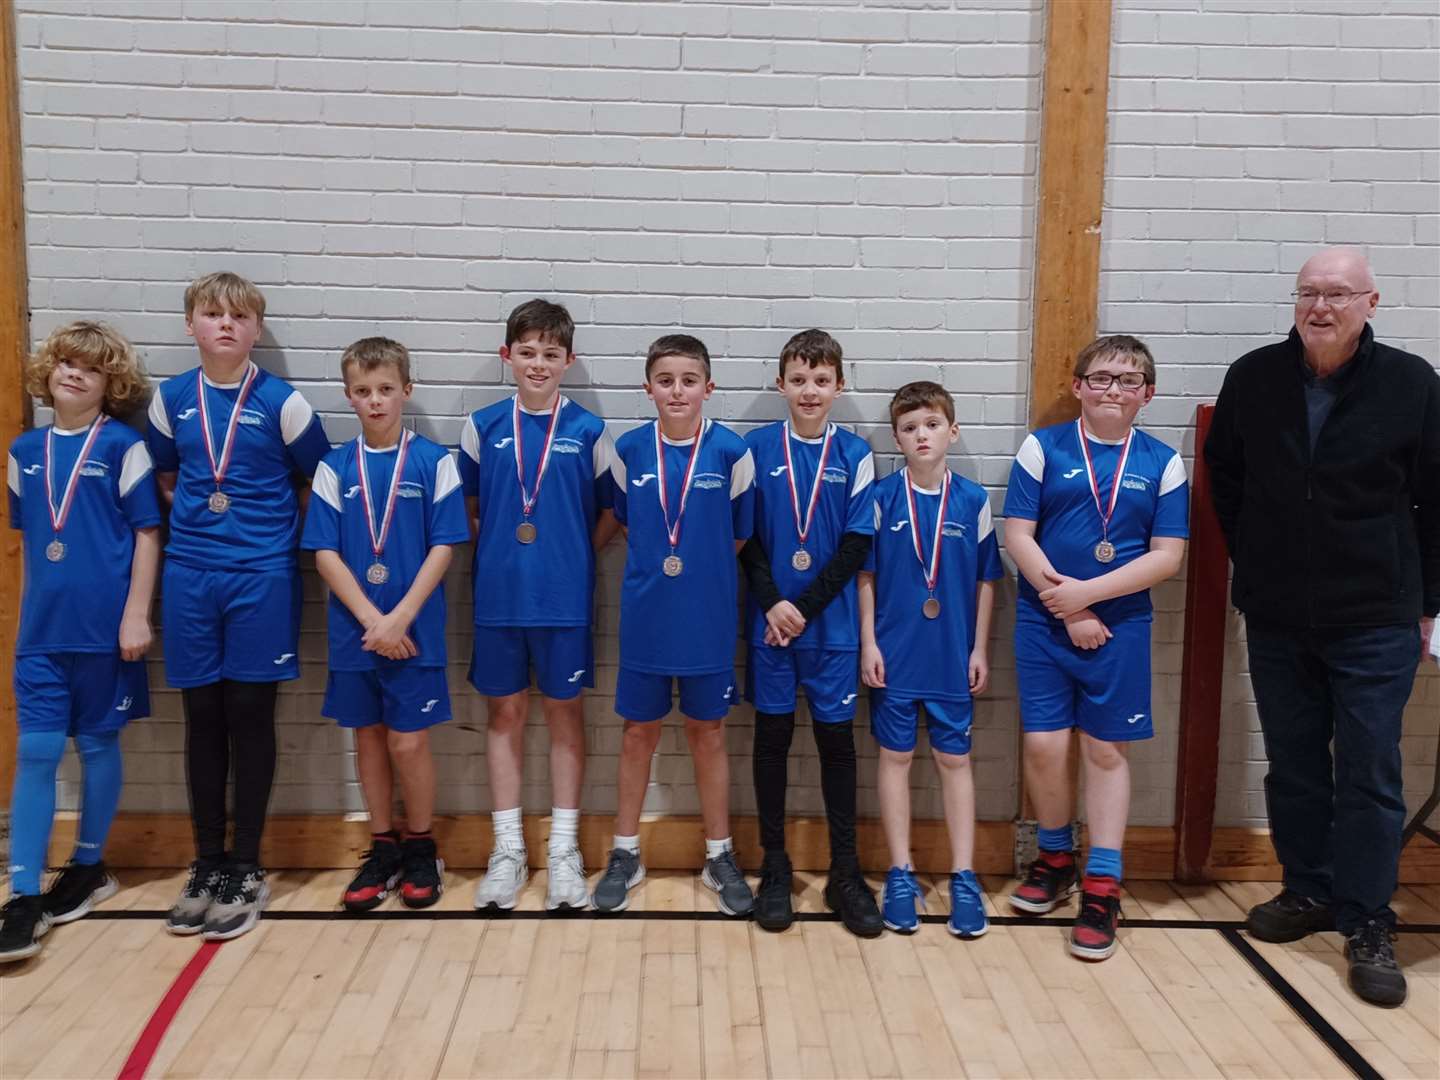 Dornoch Primary School boys' team were runners-up in the Big Schools category.